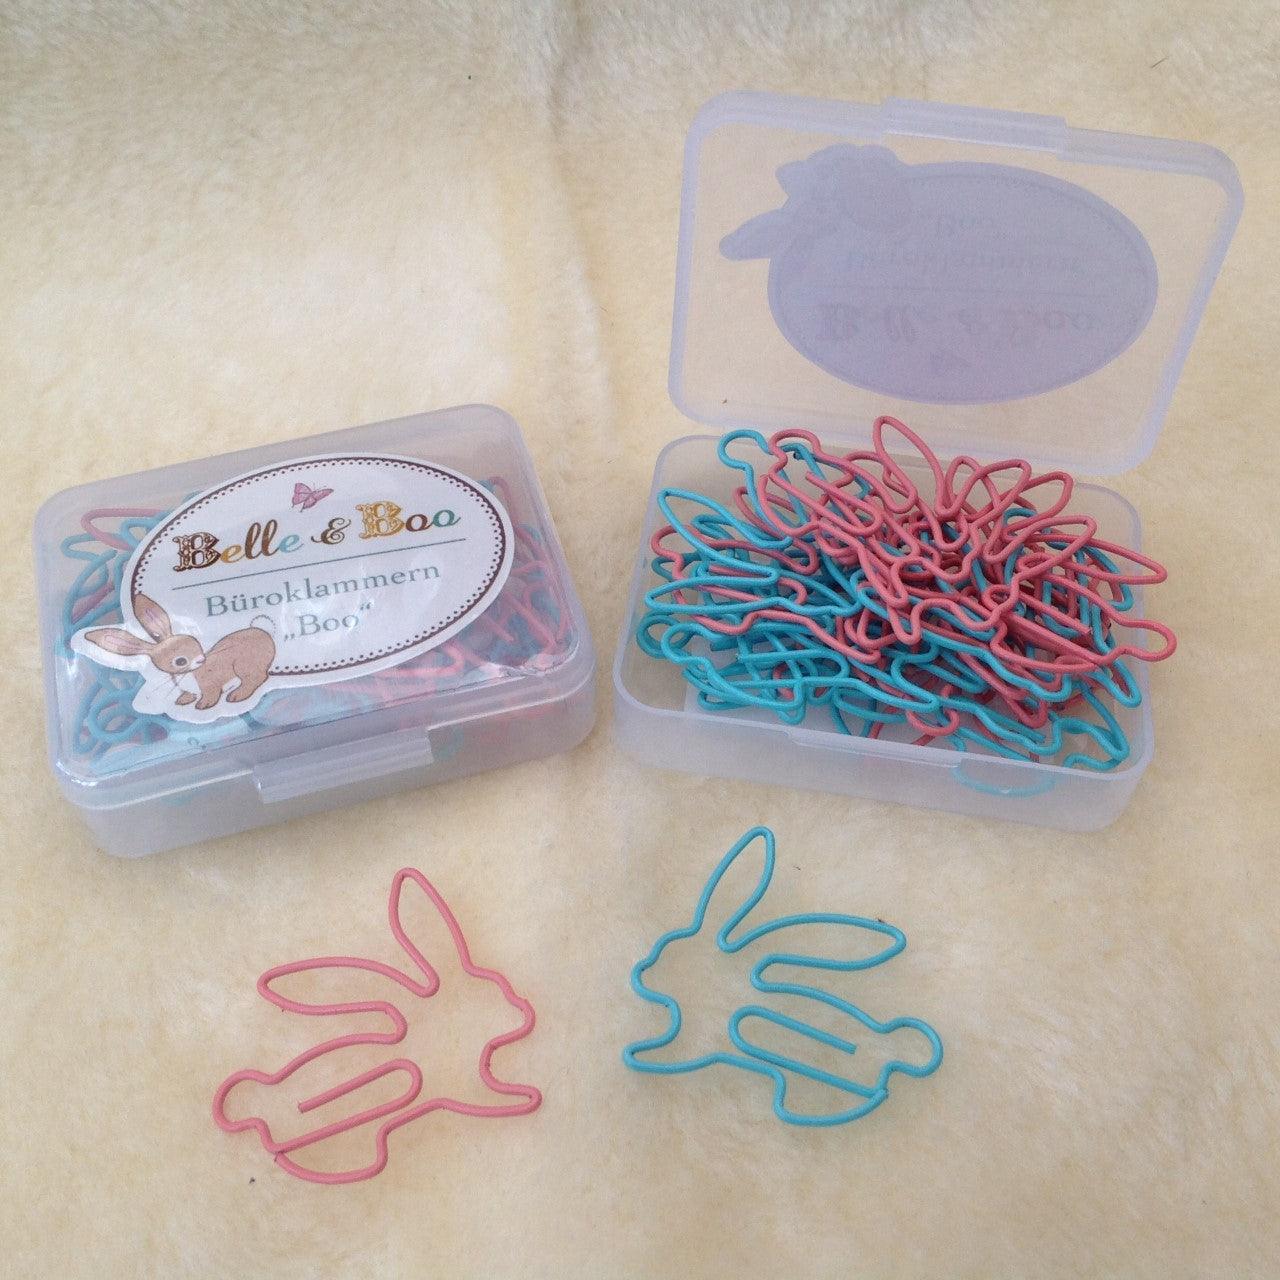 Belle & Boo Bunny Rabbit Shaped Paper Clip Box - Bunny Creations